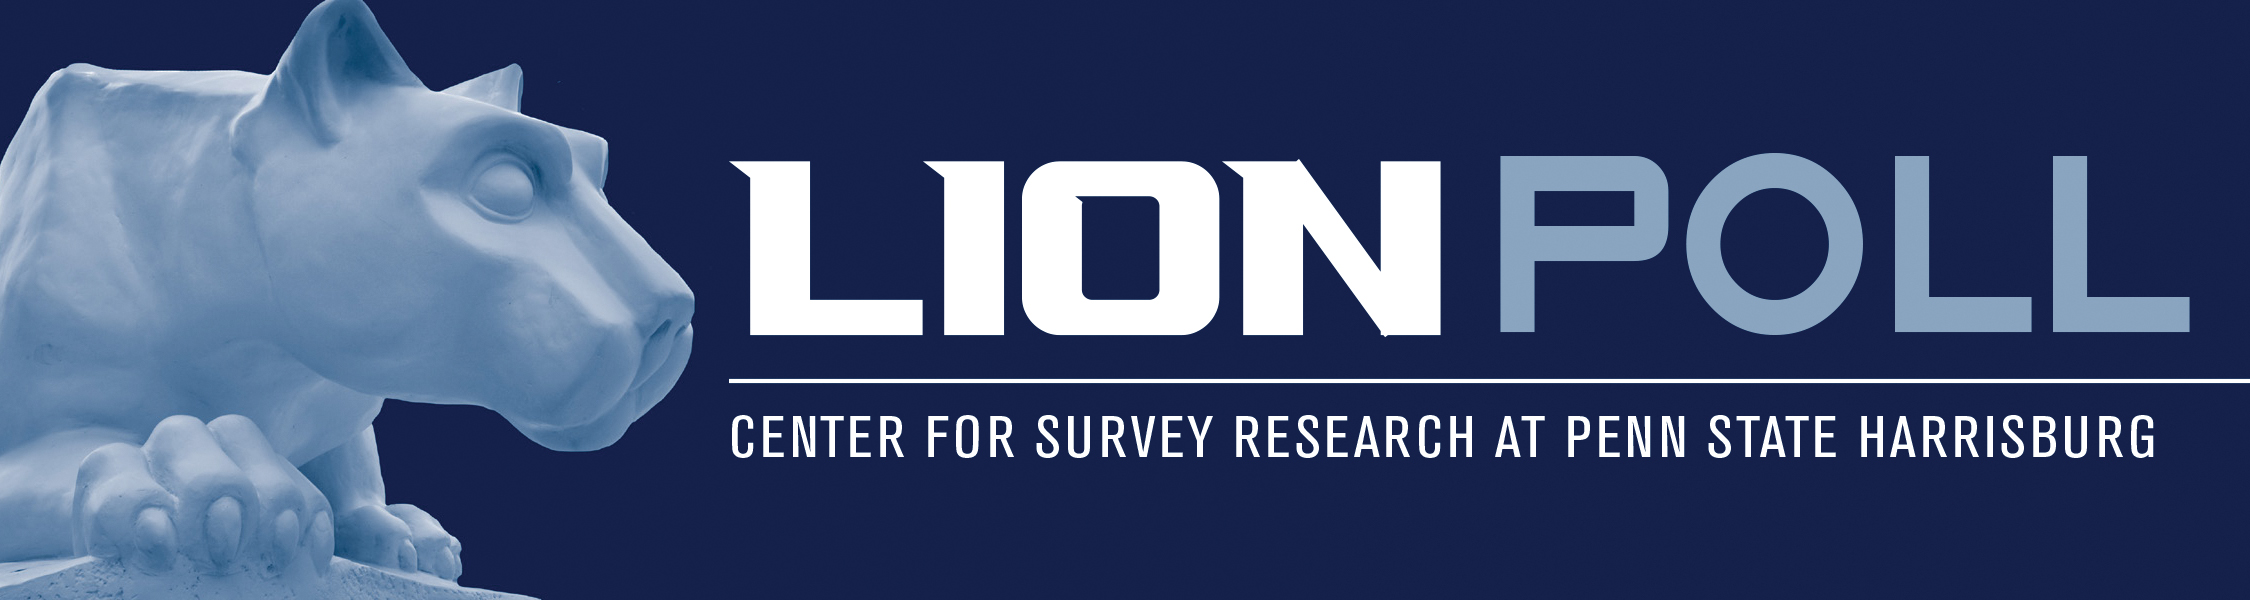 Lion Poll, Center for Survey Research at Penn State Harrisburg